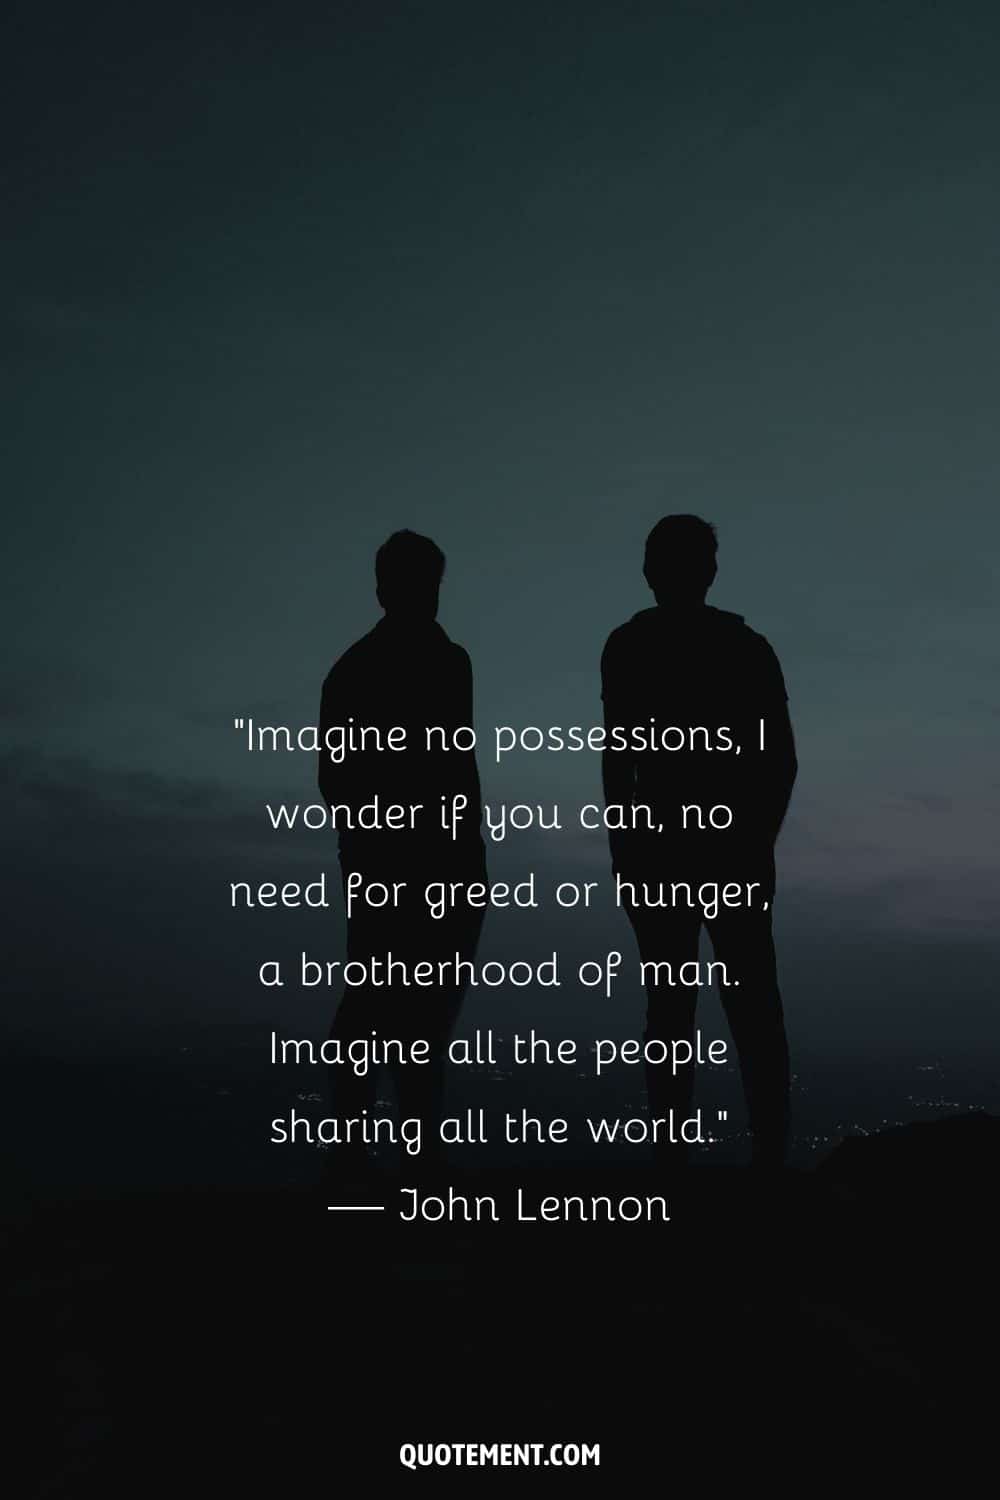 “Imagine no possessions, I wonder if you can, no need for greed or hunger, a brotherhood of man. Imagine all the people sharing all the world.” — John Lennon